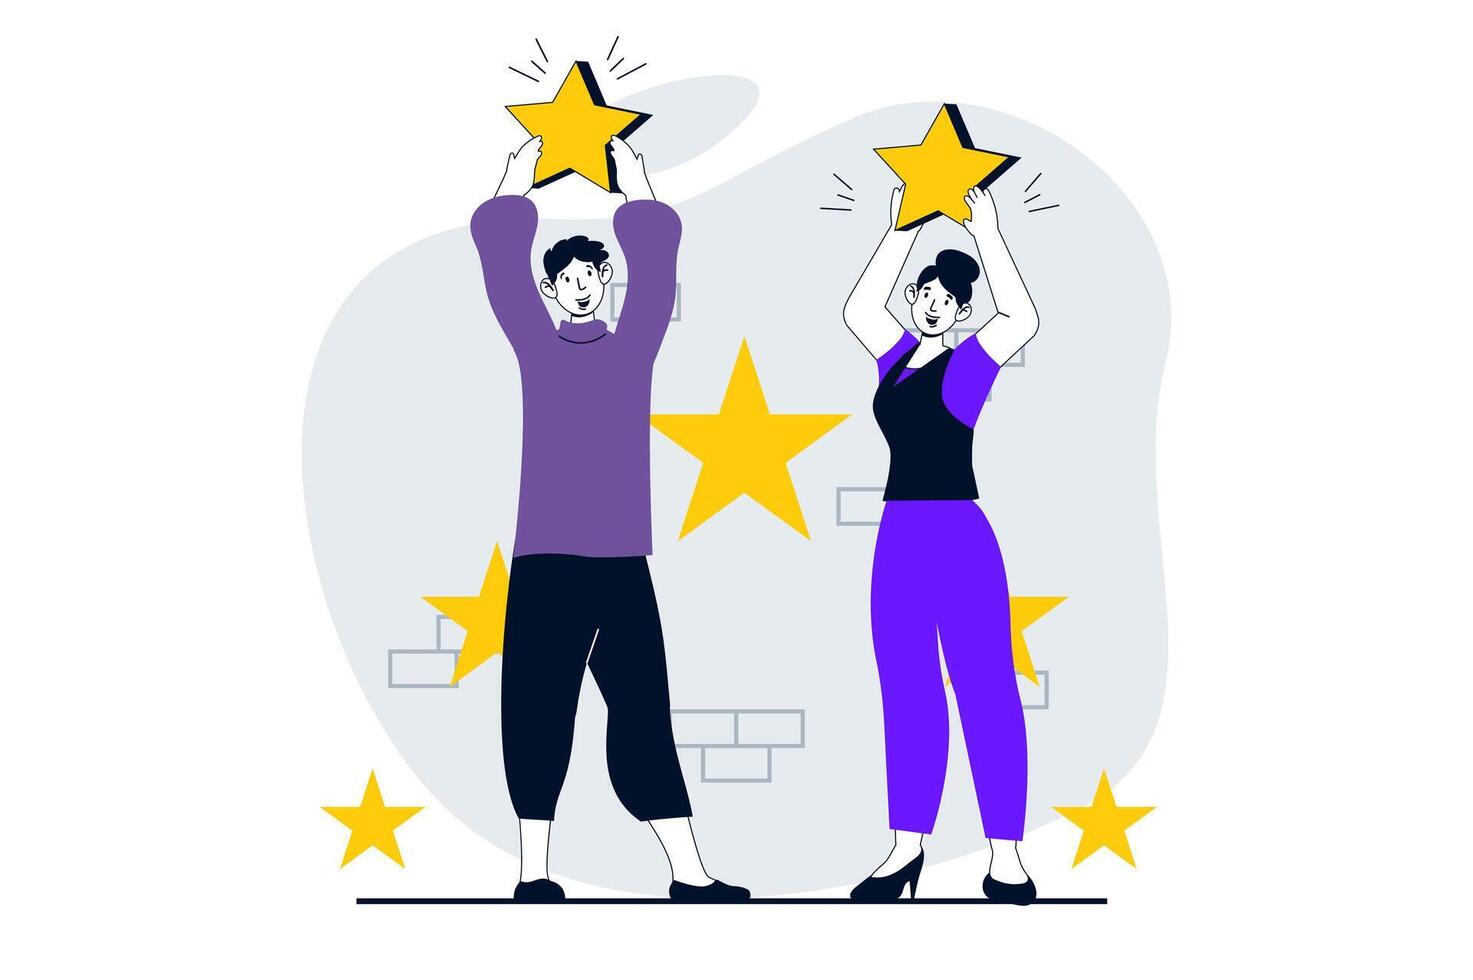 Feedback page concept with people scene in flat design for web. Happy man and woman holding stars and giving best assessment rating. Vector illustration for social media banner, marketing material.